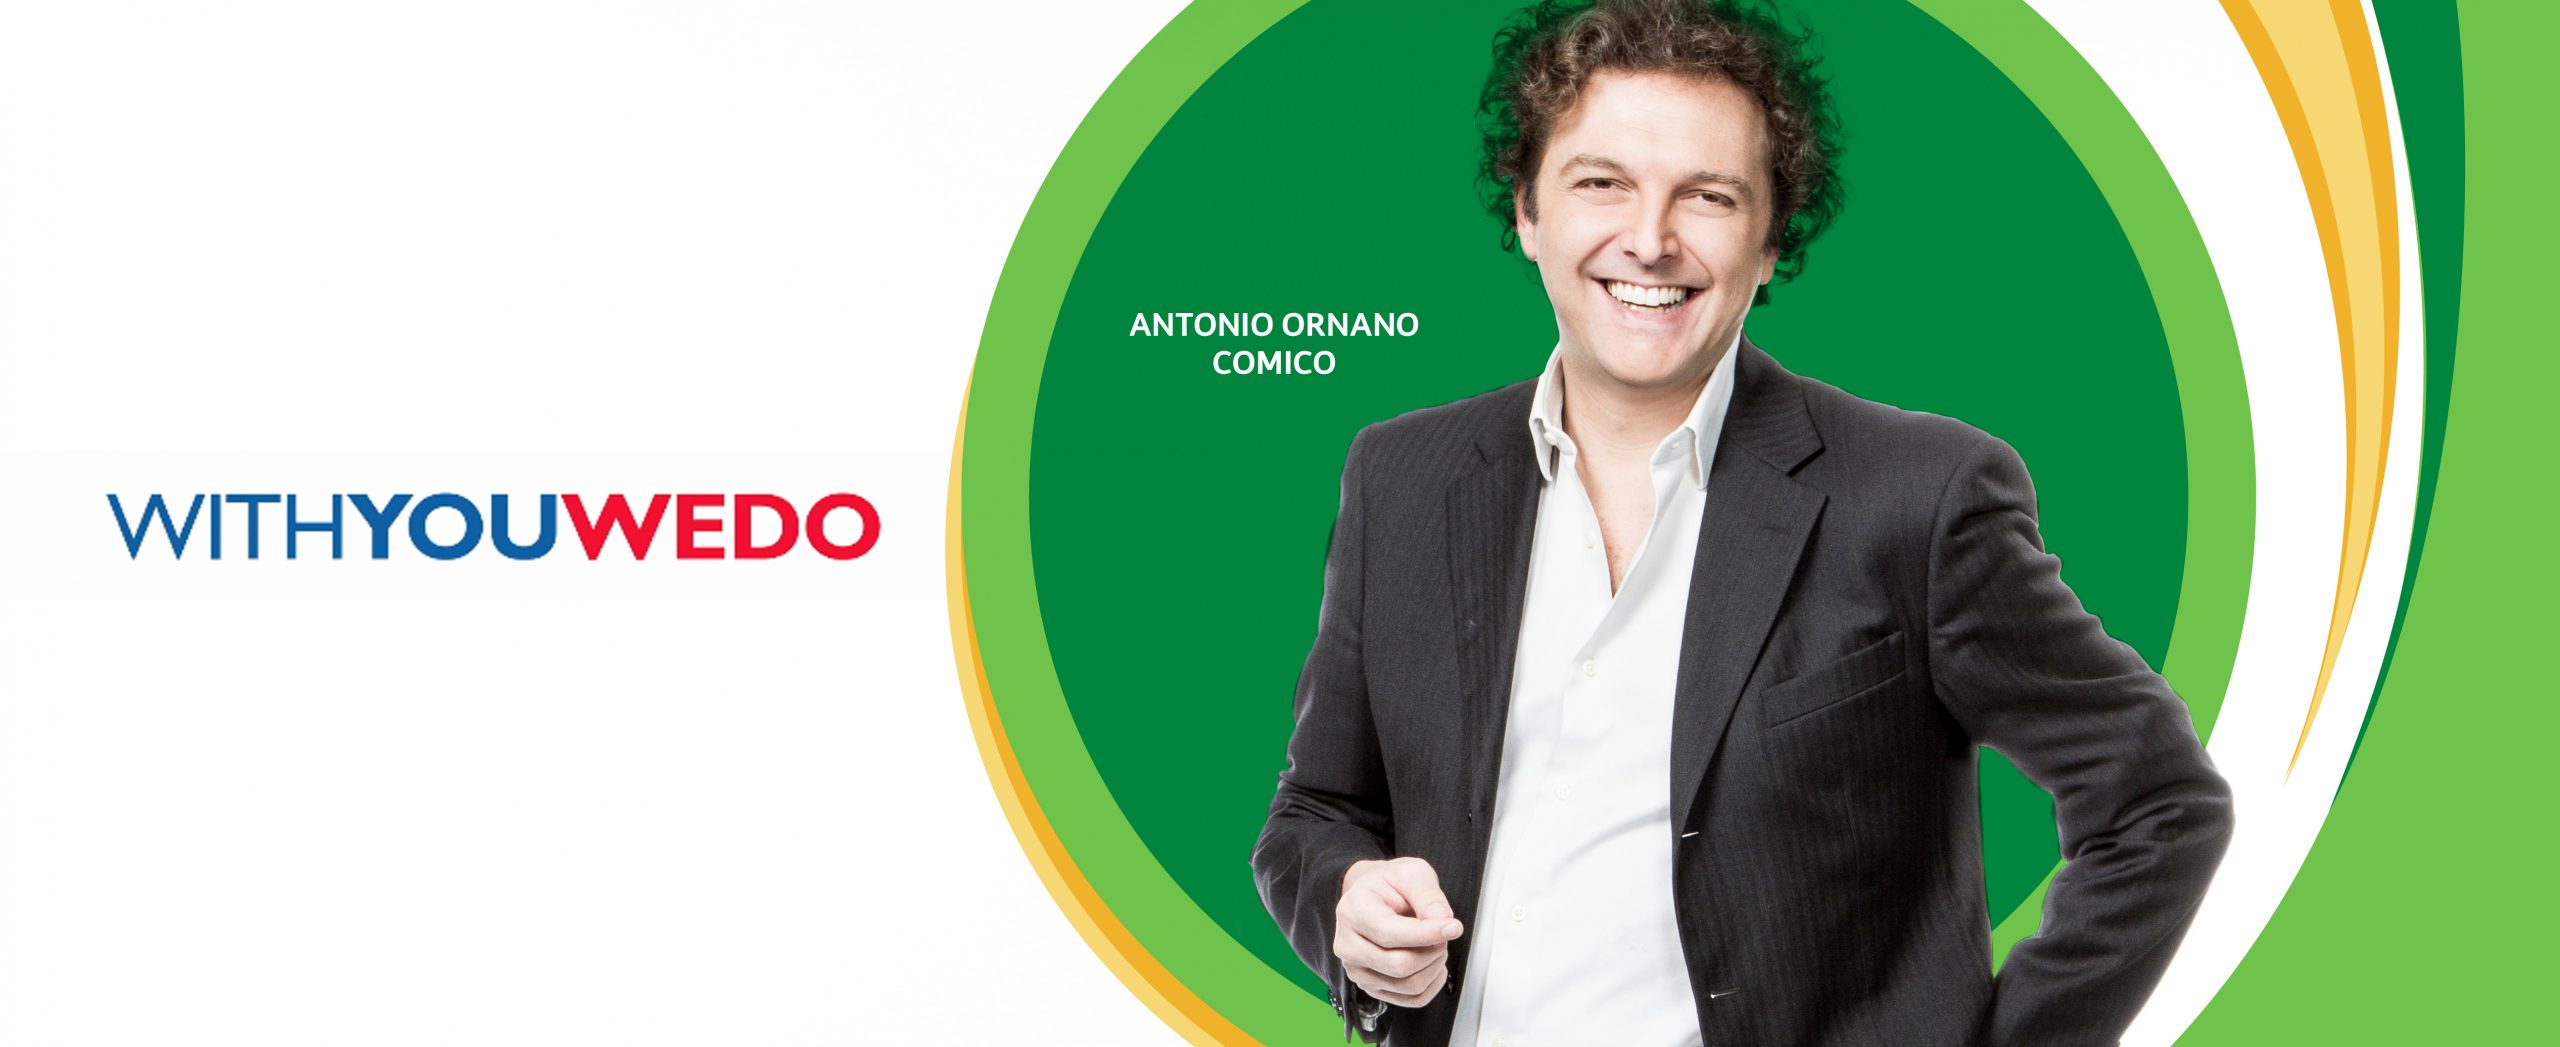 TIM CROWDFUNDING IS BACK AND THIS TIME IT IS EVEN MORE “CONTAGIOUS” WITH ARMANDO TESTA AND ANTONIO ORNANO FROM ZELIG.